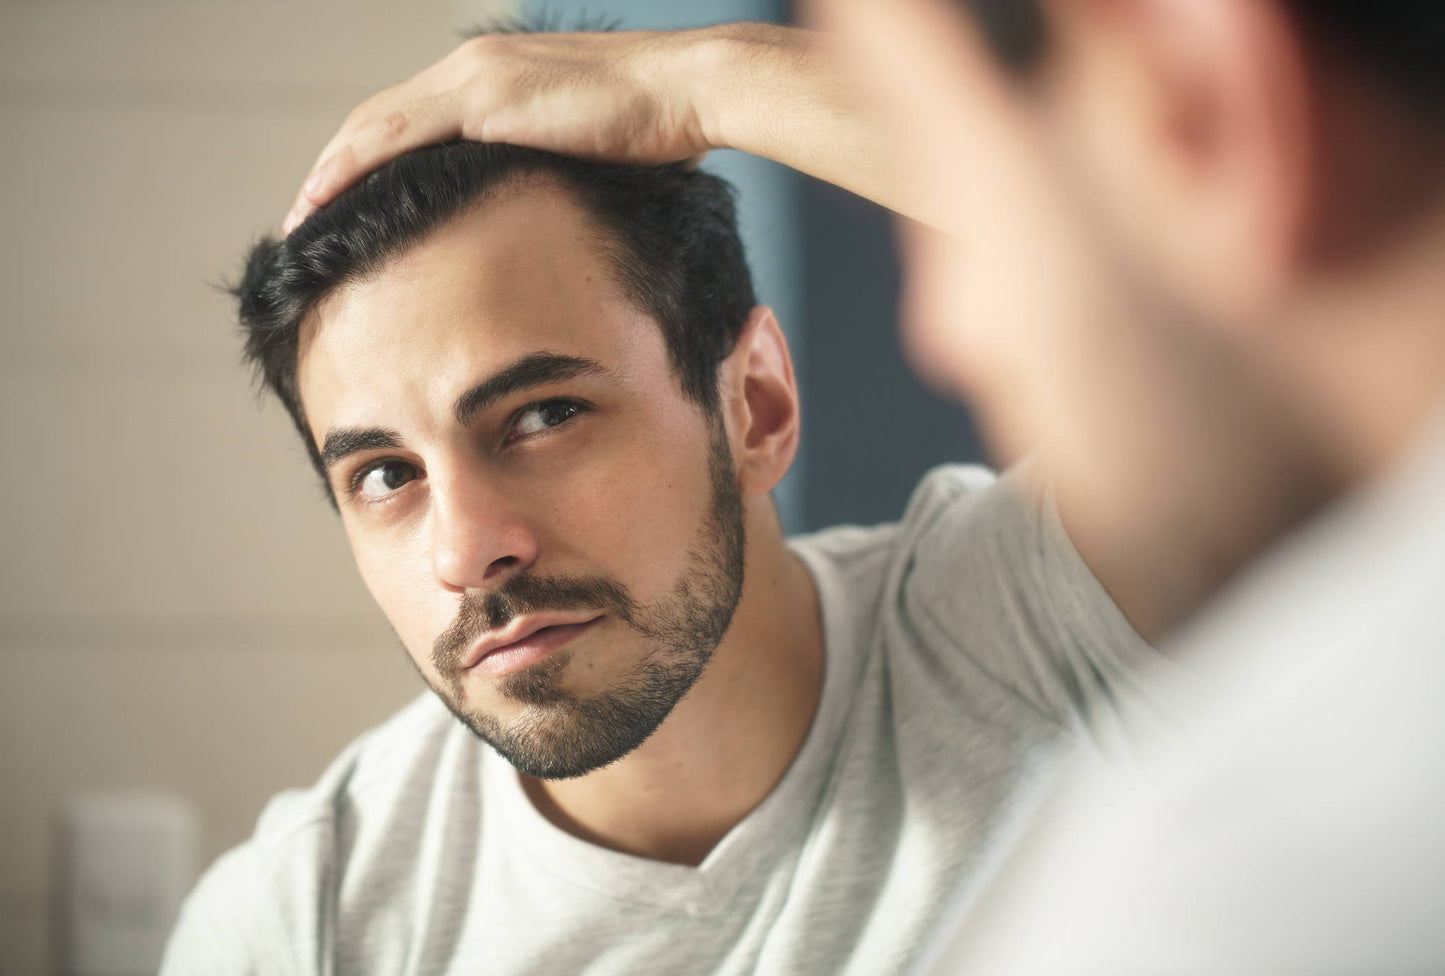 What Are the Side Effects of Finasteride?